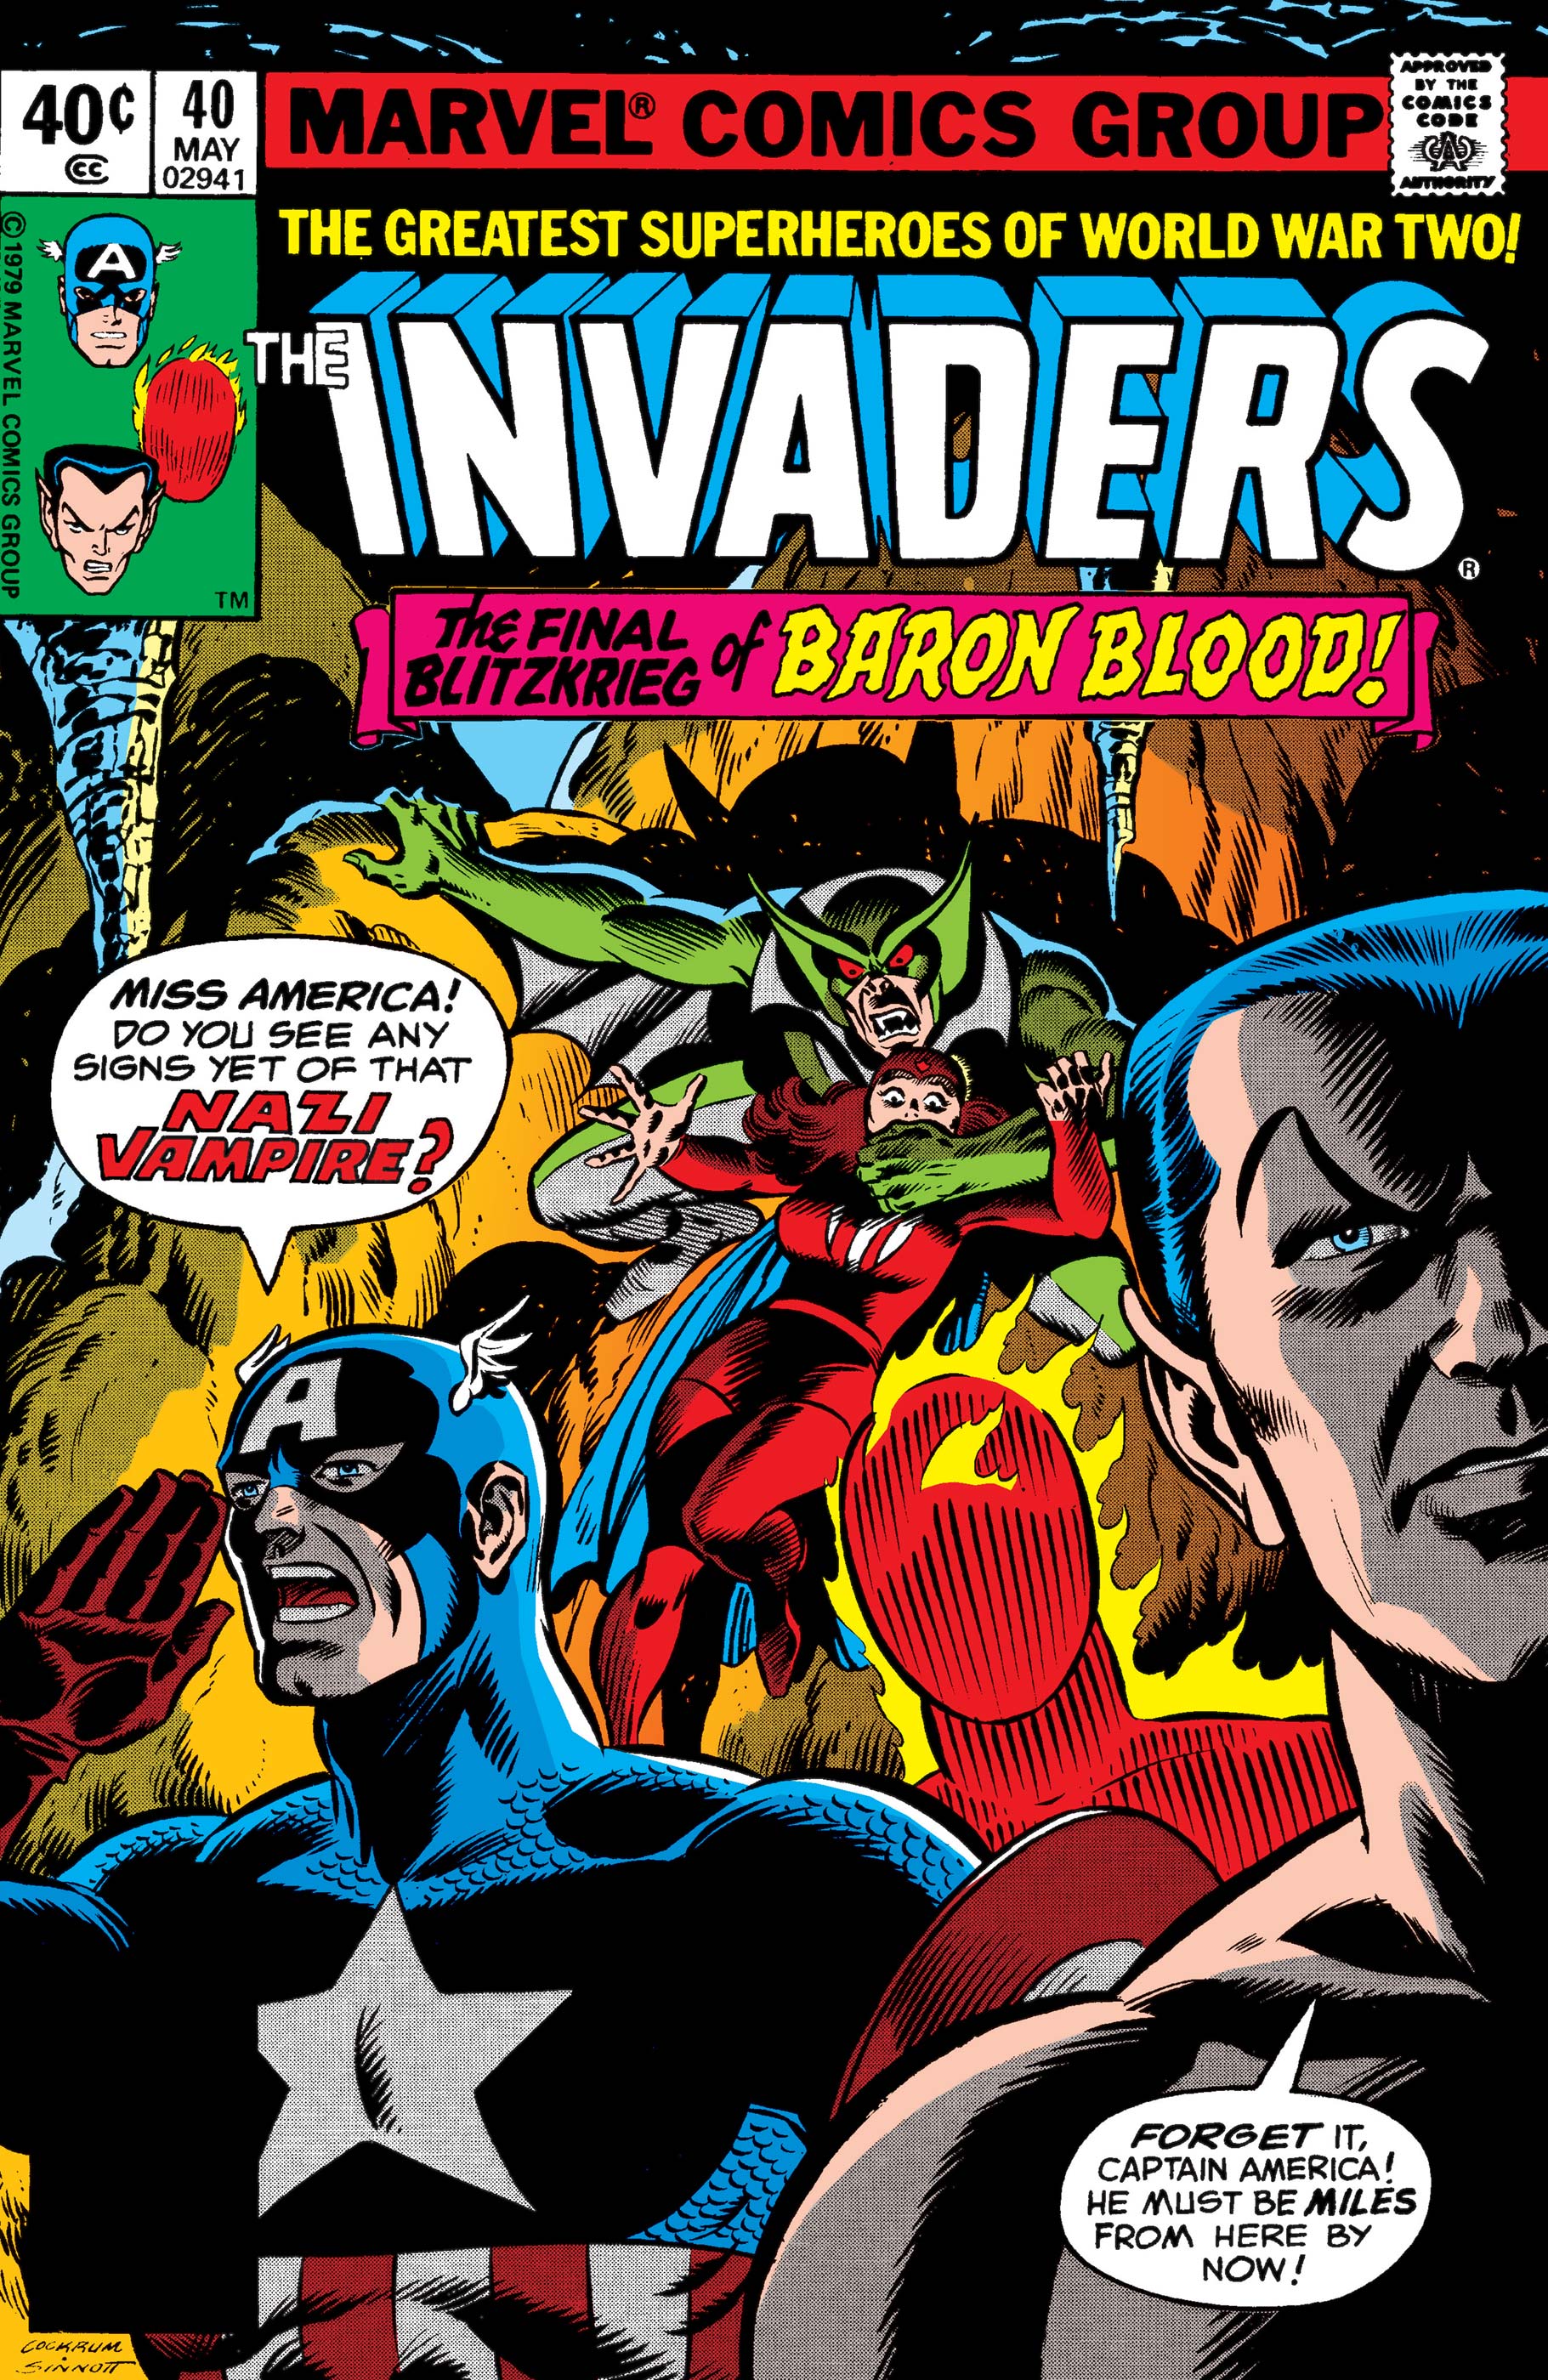 Invaders (1975) #40